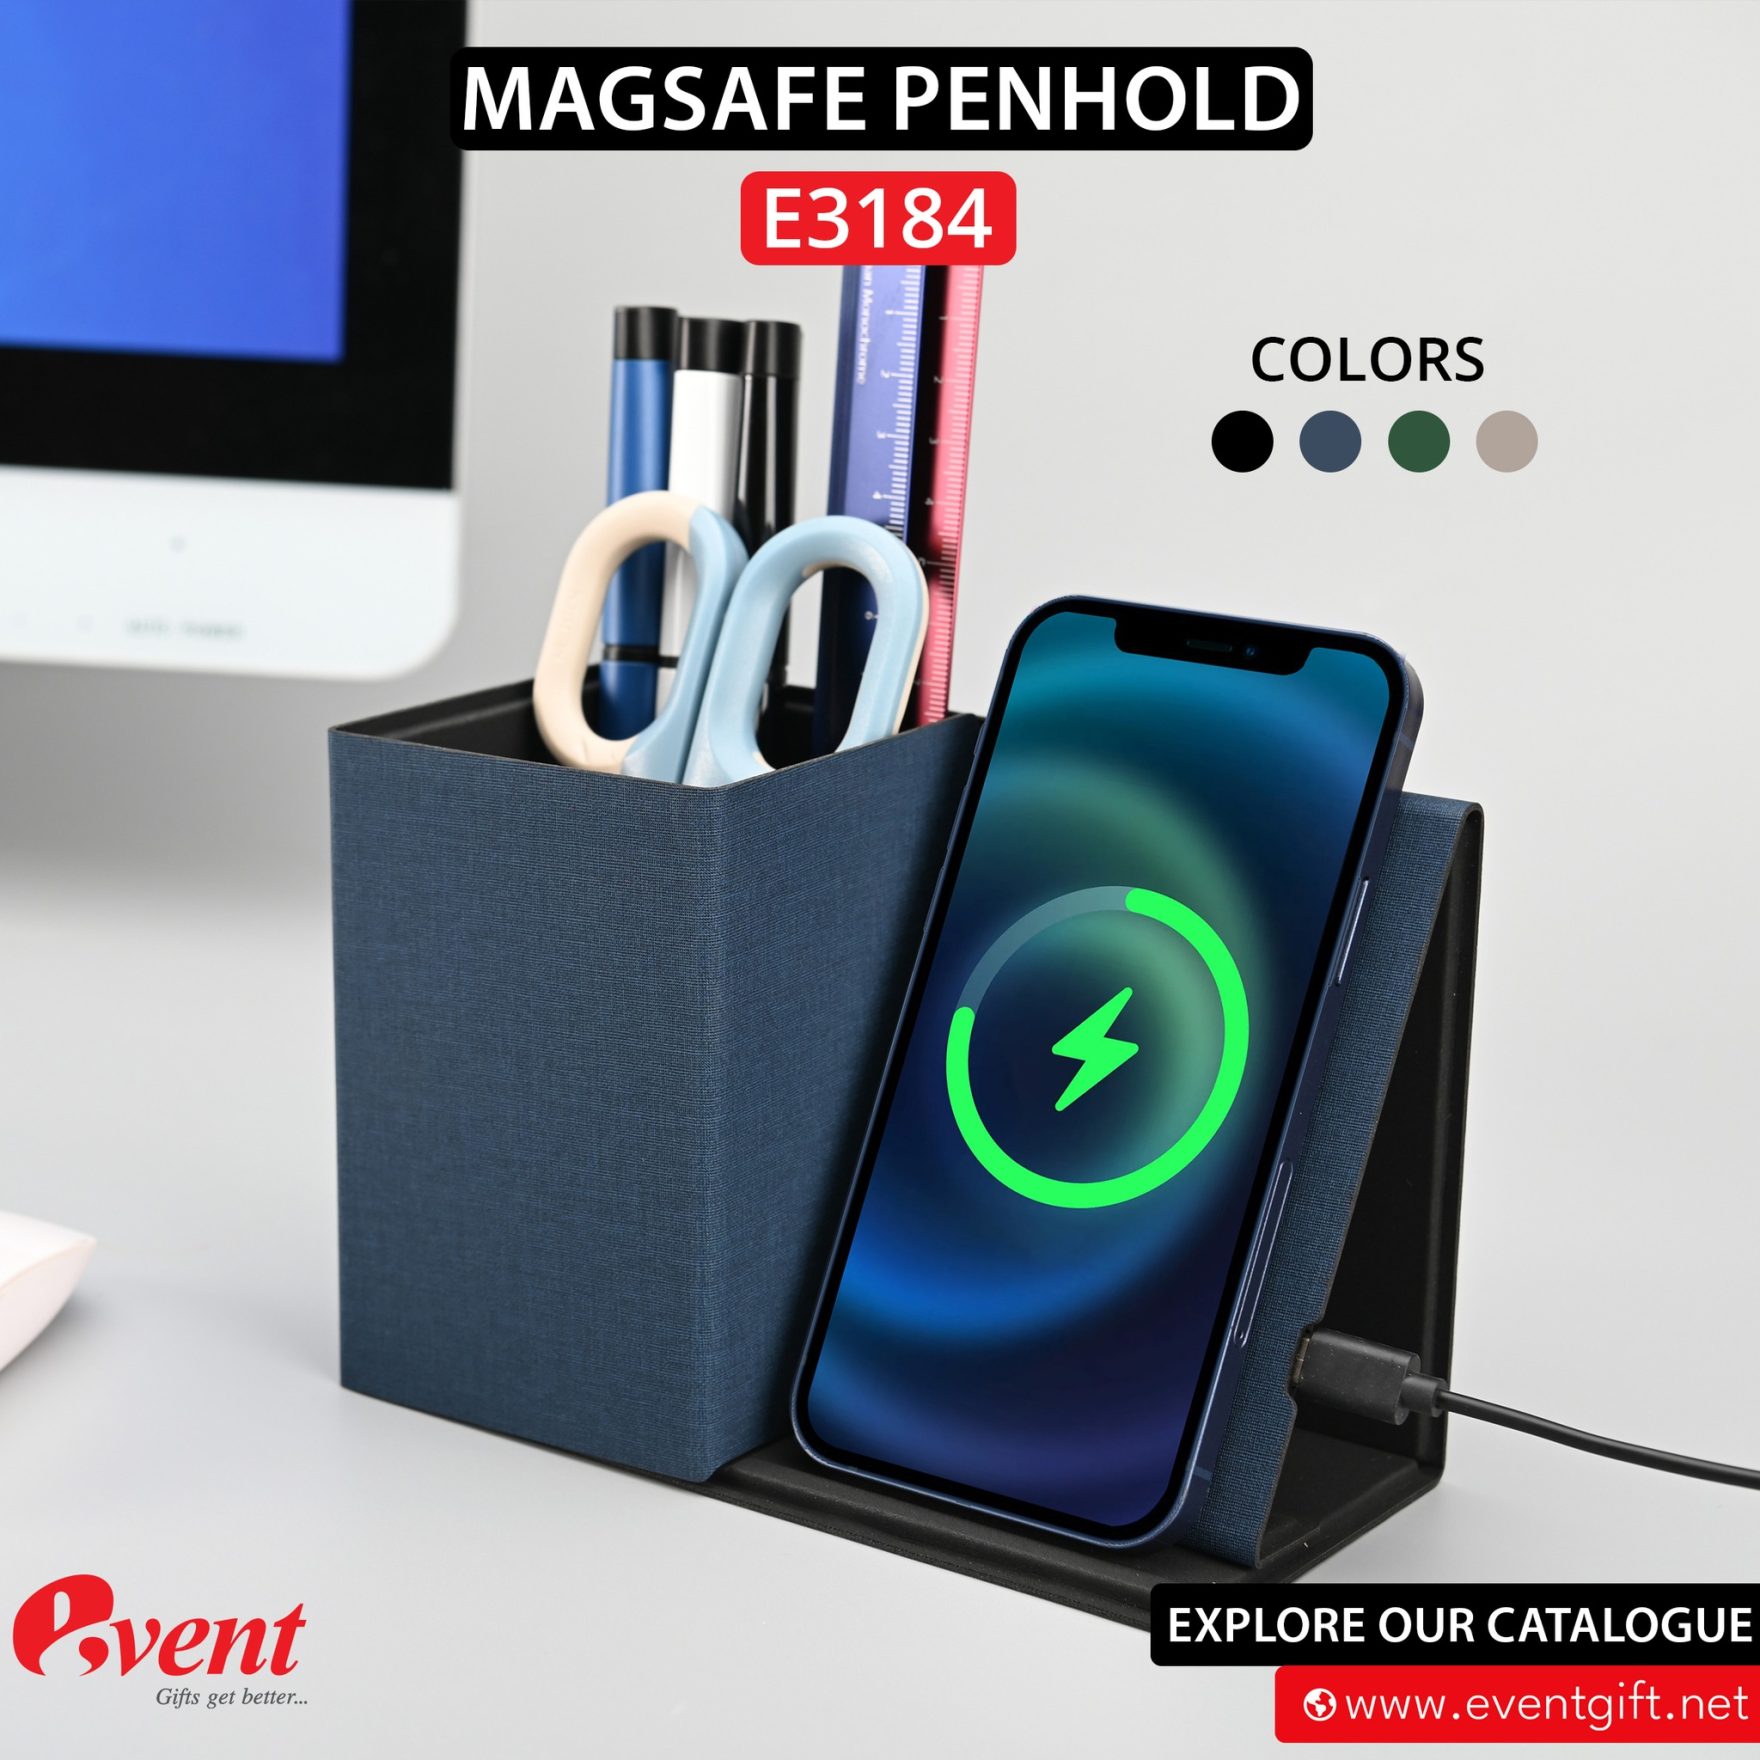 MAGSAFE PENHOLD,Event Gift